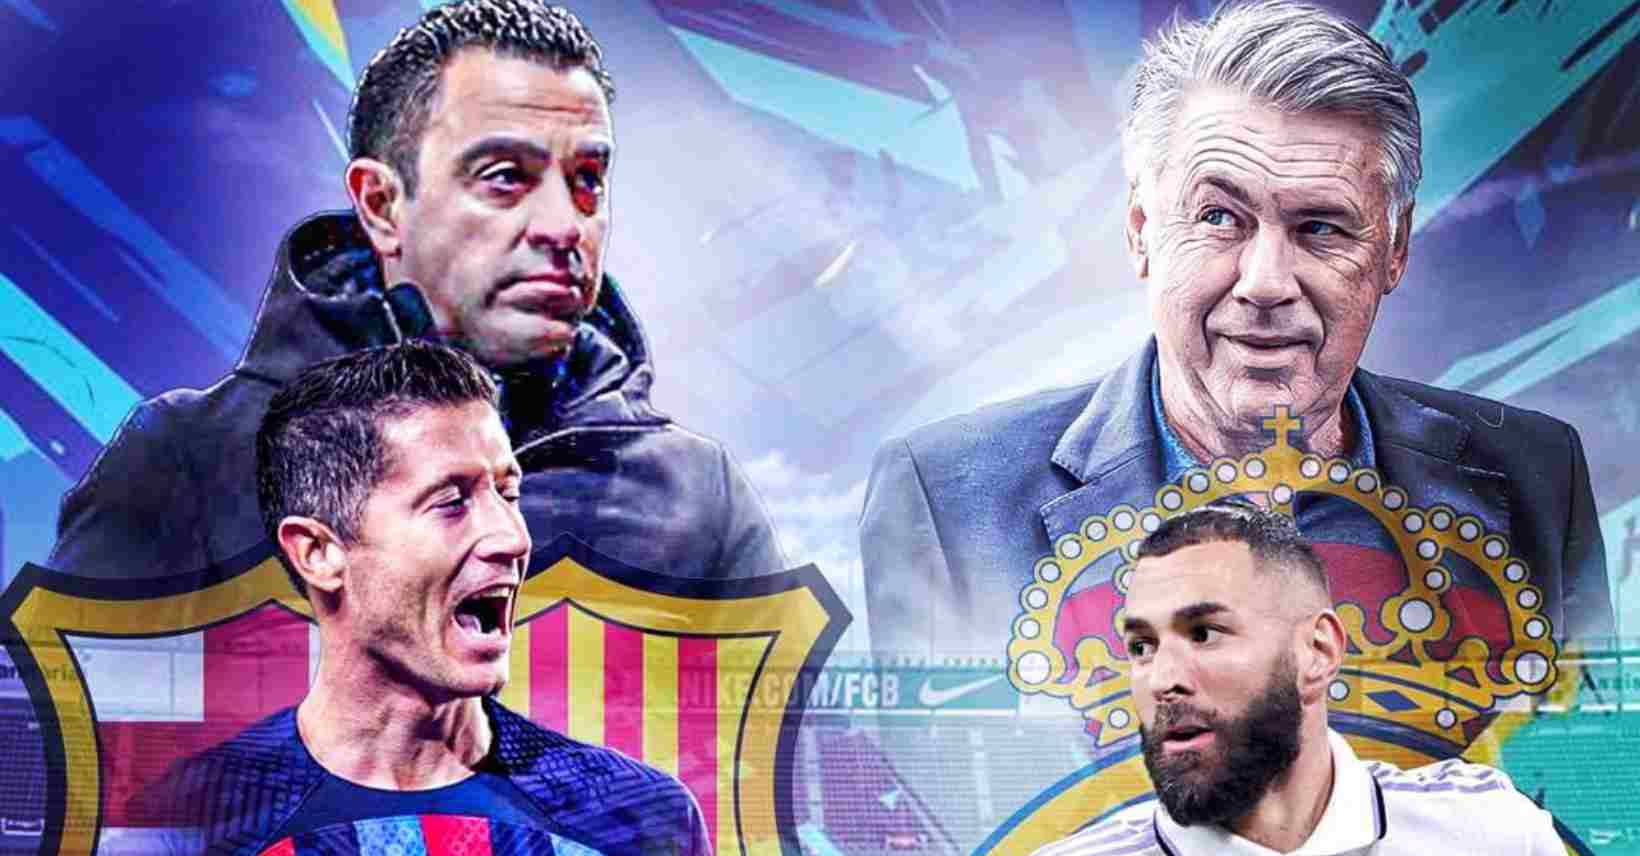 El Clasico Match Preview with Predicted Lineup and Squad List (Barcelona vs Real Madrid) Matchday 26 - LaLiga 2022/23 One of the biggest hits on the footballing calendar will be taking place between Barcelona and Real Madrid, on Sunday night at Camp Nou. #barcelona #realmadrid #barçamadrid #madrid #barcamadrid #madridbarça #elclasico #supercup #spanishsupercup #supercopa #Ferran #barca #fcblive #fcbarcelona #barcelona #ferrantorres #torres #pedri #gavi #barcanews #frenkiedejong #roberto #dembele #CHRISTENSEN #elclásico #Araujo #Kounde